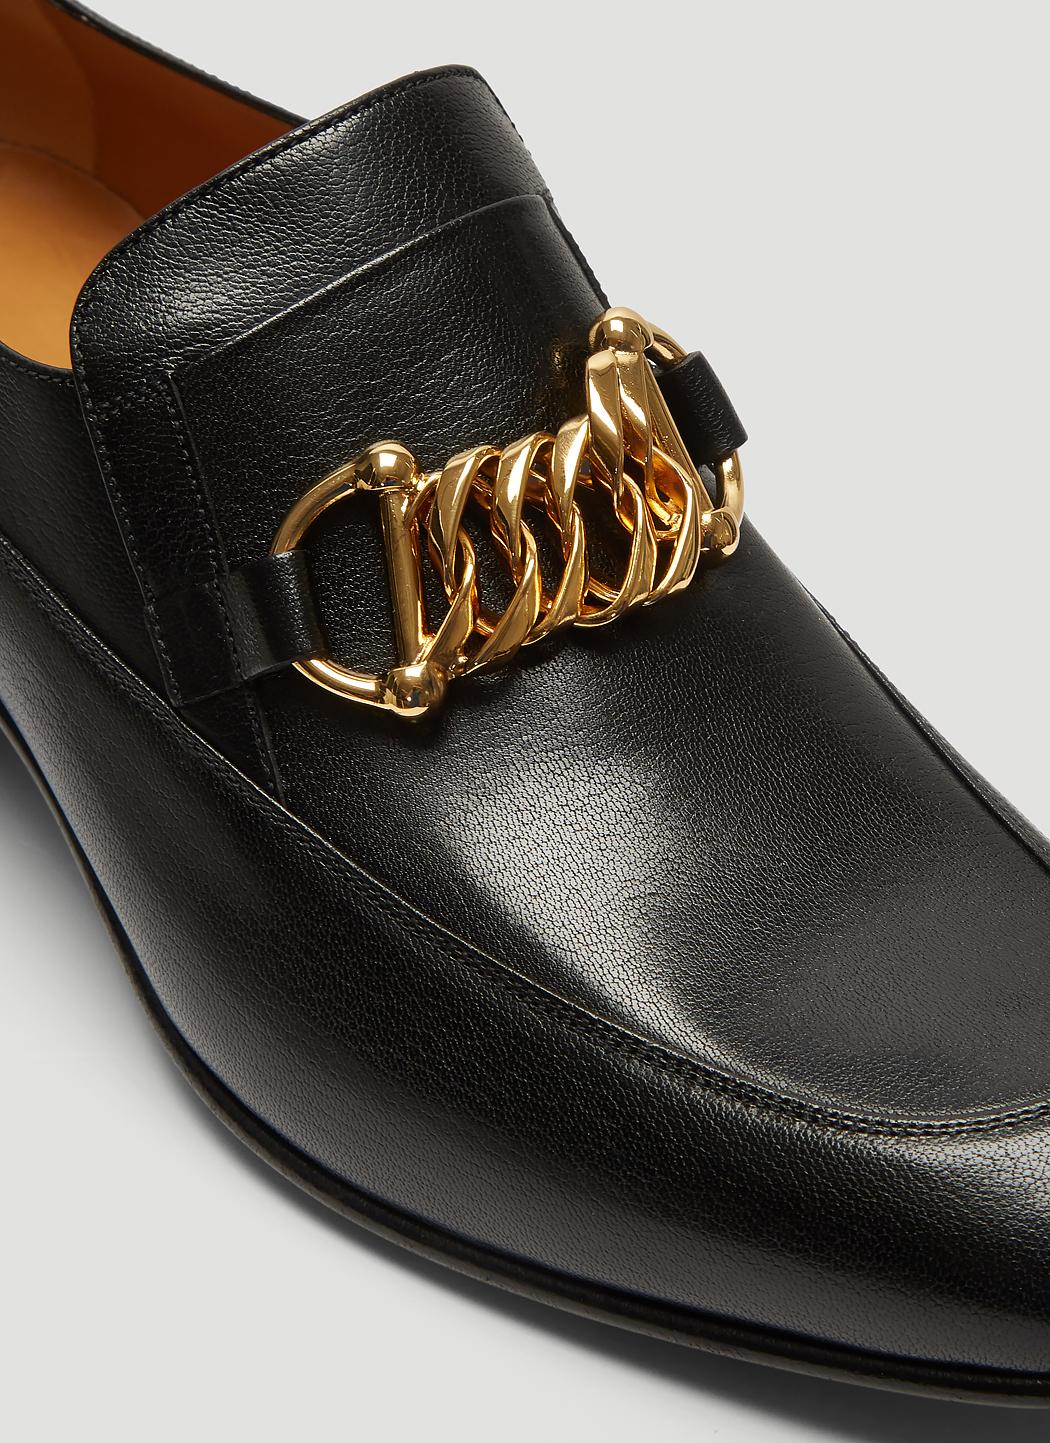 Gucci Ice Lolly Leather Chain Loafers In Black for Men - Lyst